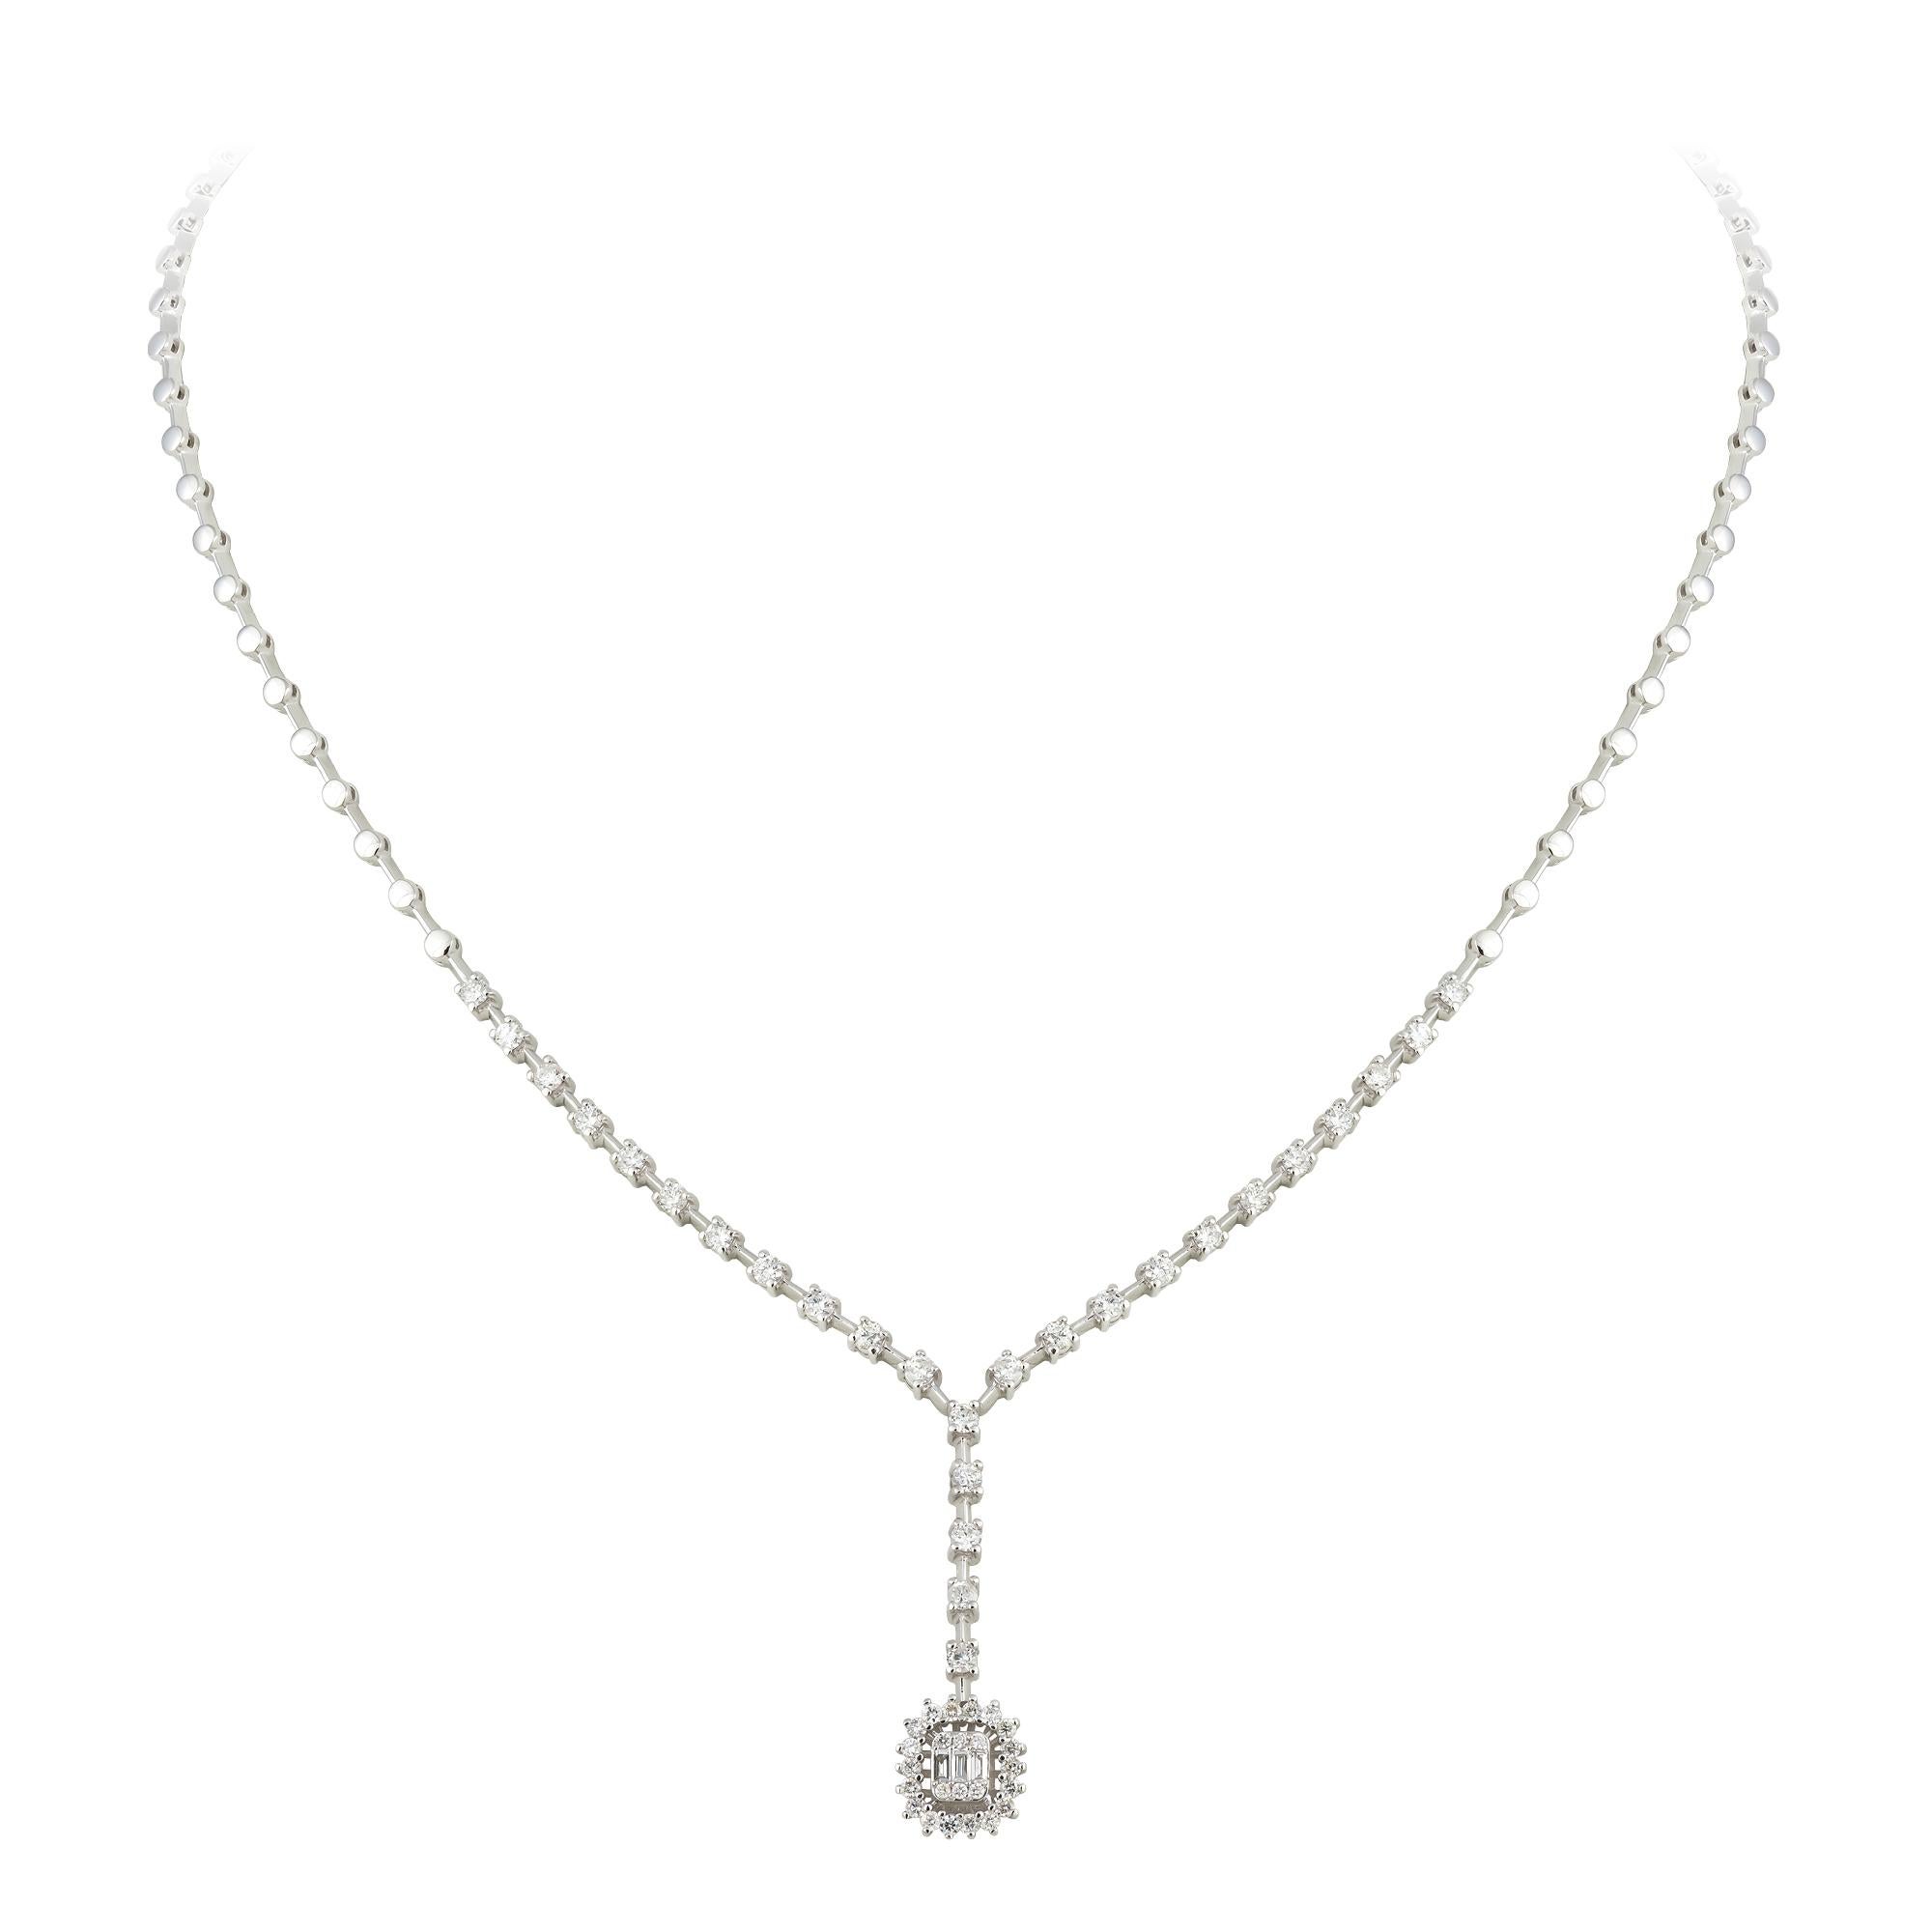 NECKLACE 18K White Gold Diamond 1.35 Cts/51 Pcs Tapered Baguette 0.06 Cts/3 Pcs
